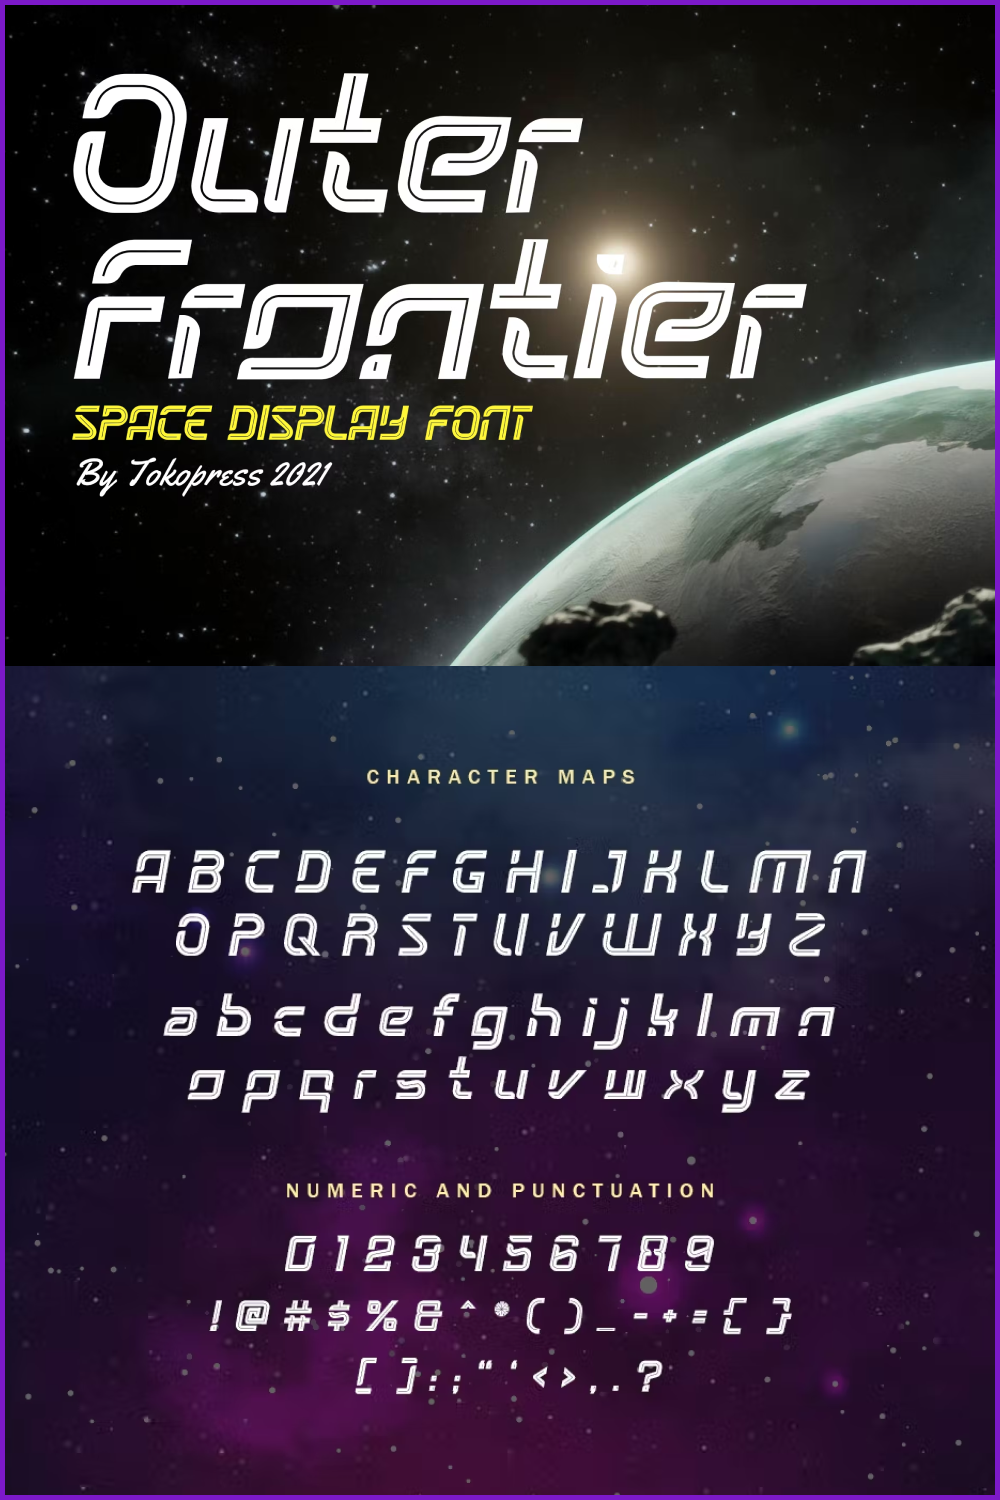 An example of a Outer Frontier font on a white space background.